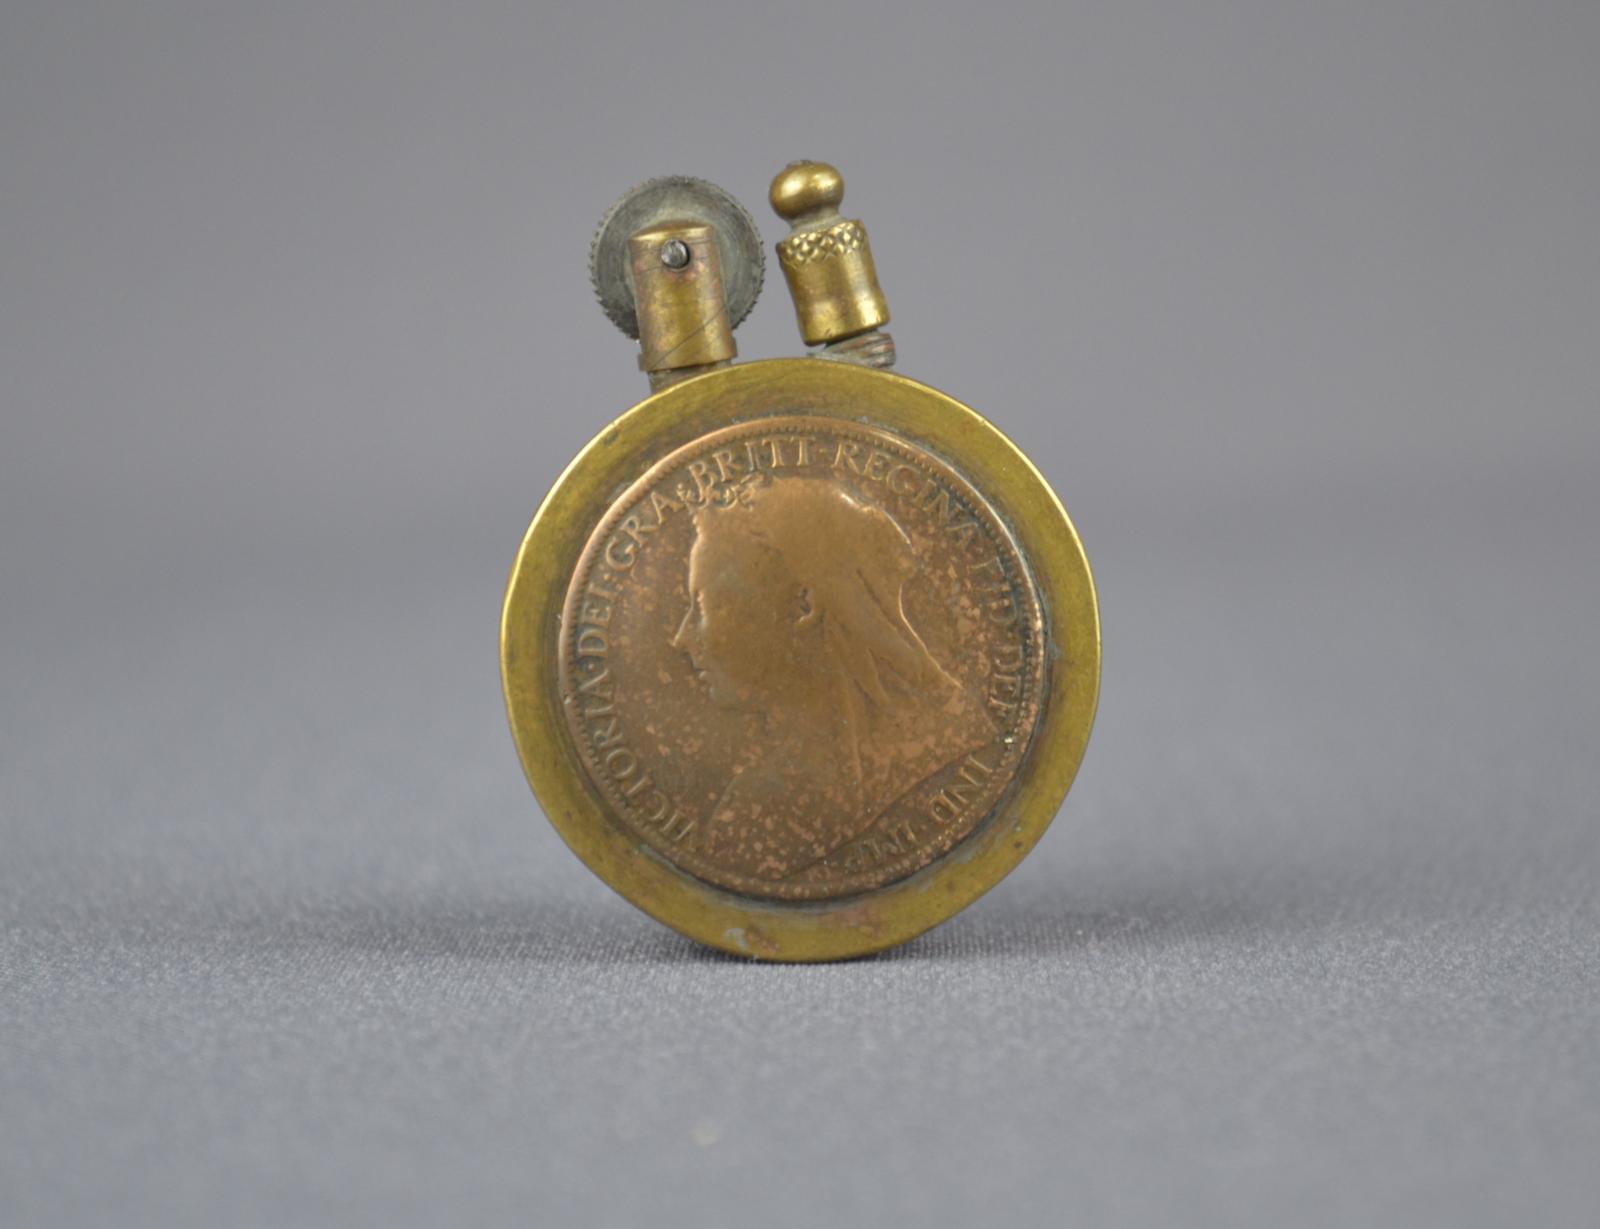 Obverse view of trench made cigarette lighter showing a coin featuring Queen Victoria I